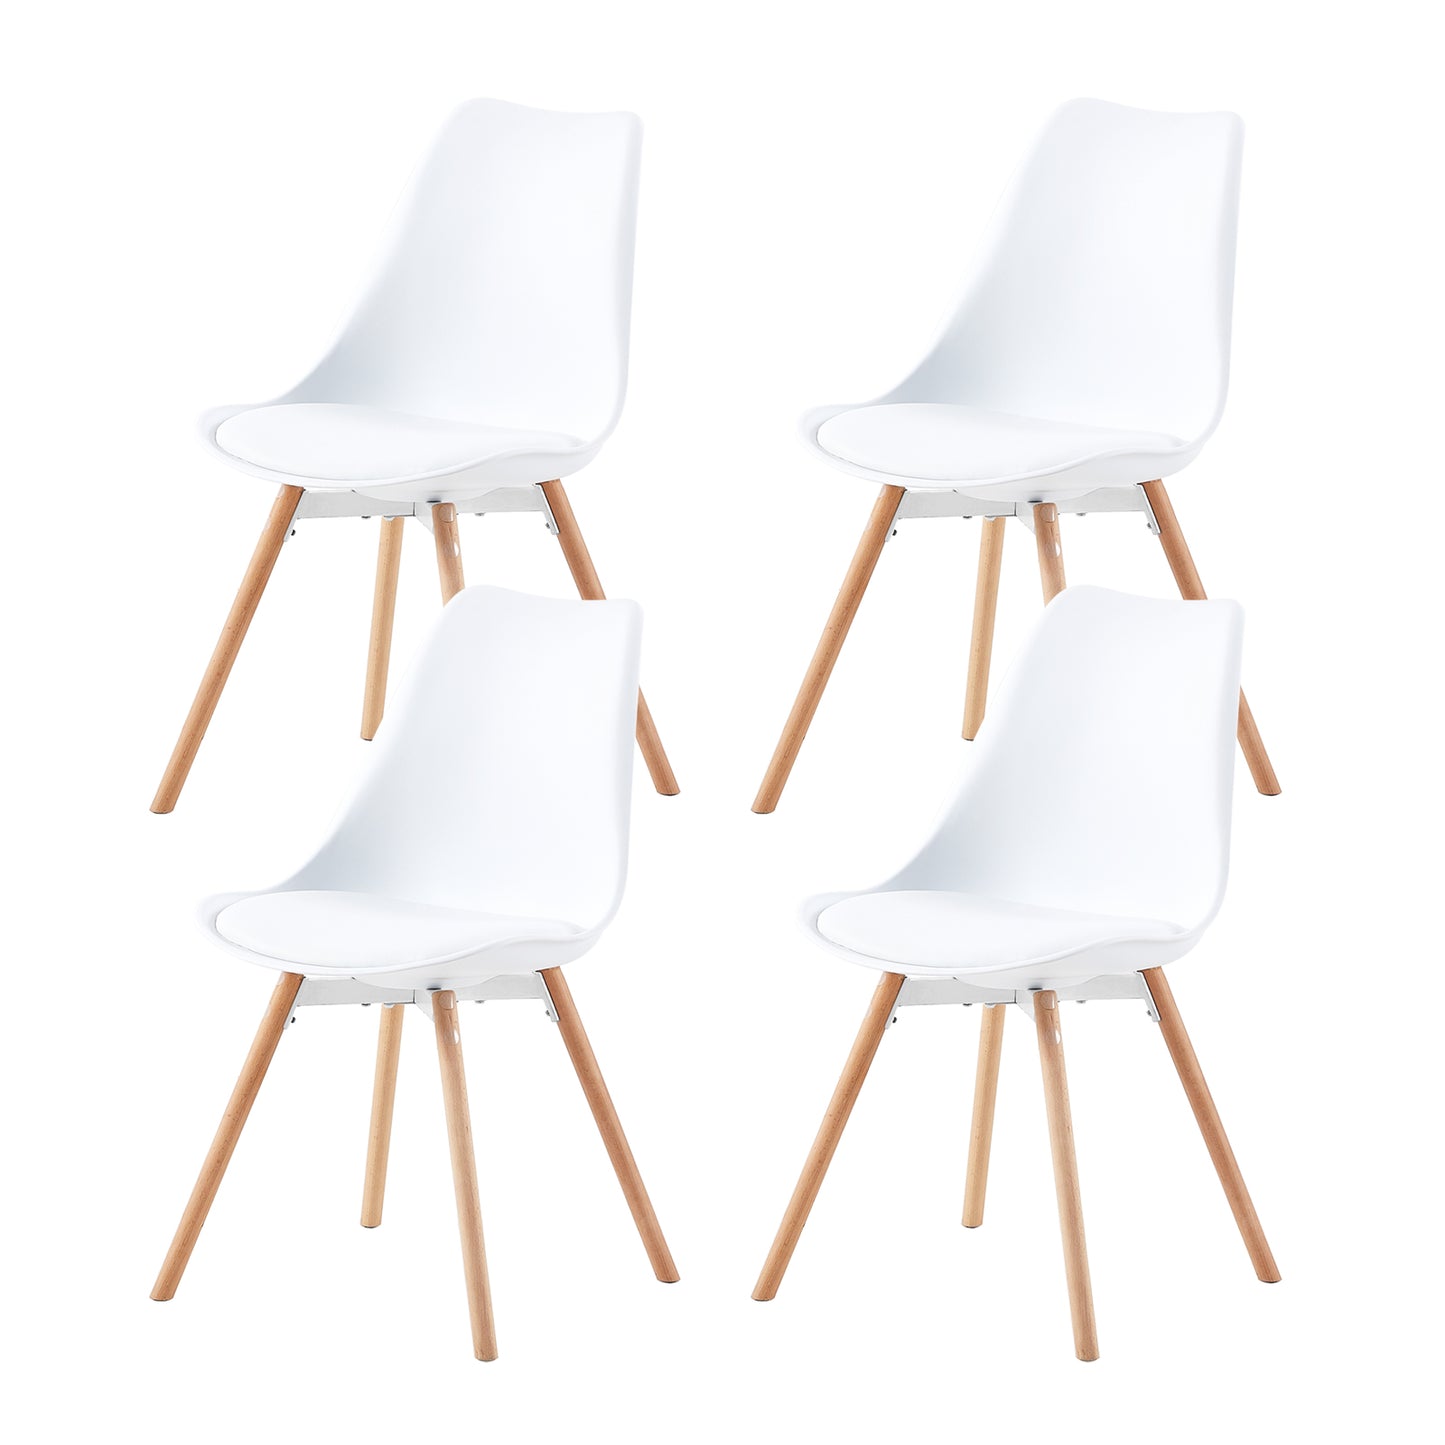 OATS Side Chair (Set of 4)